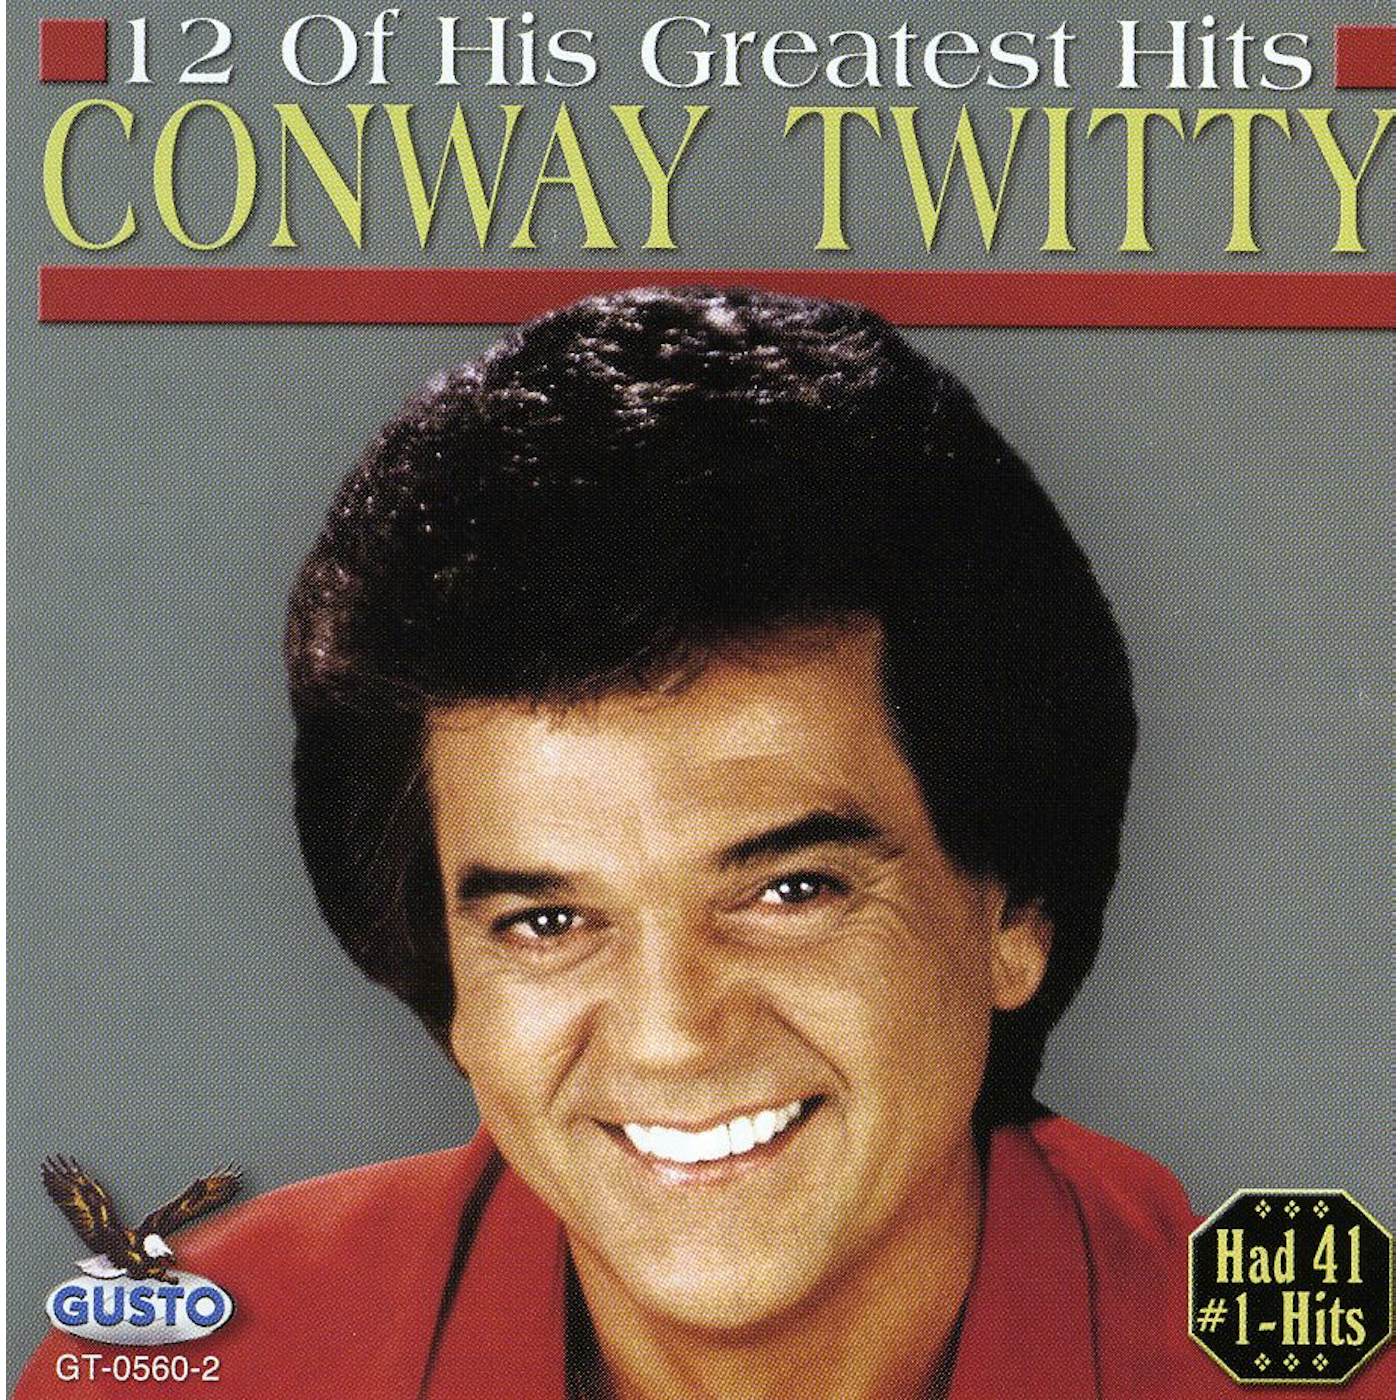 Conway Twitty 12 OF HIS GREATEST HITS CD